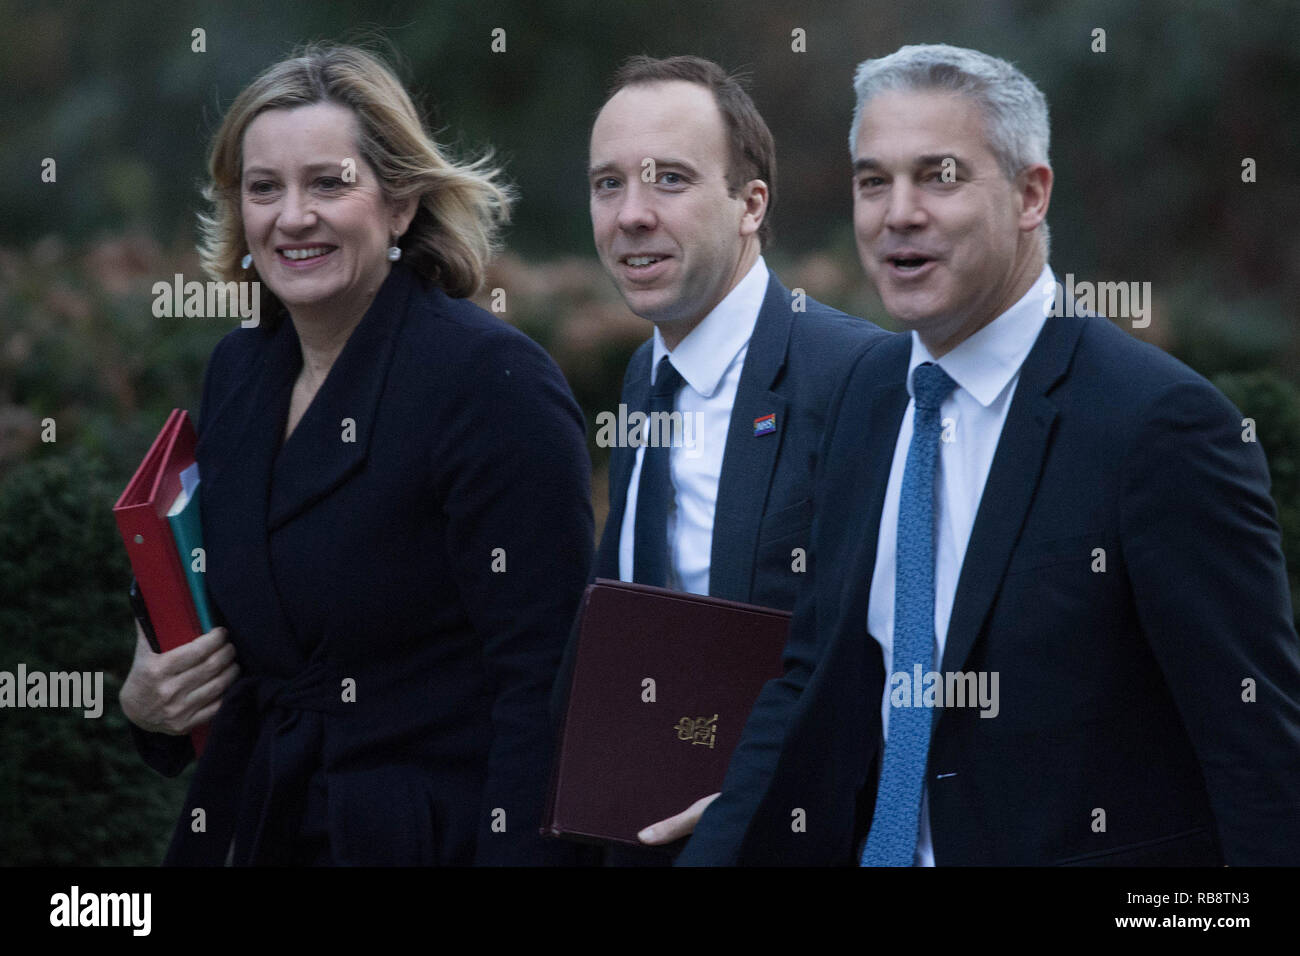 (left to right) Work and Pensions Secretary Amber Rudd, Health and Social Care Secretary Matt Hancock and Brexit Secretary Stephen Barclay, arrive in Downing Street, London, for a Cabinet meeting. Stock Photo